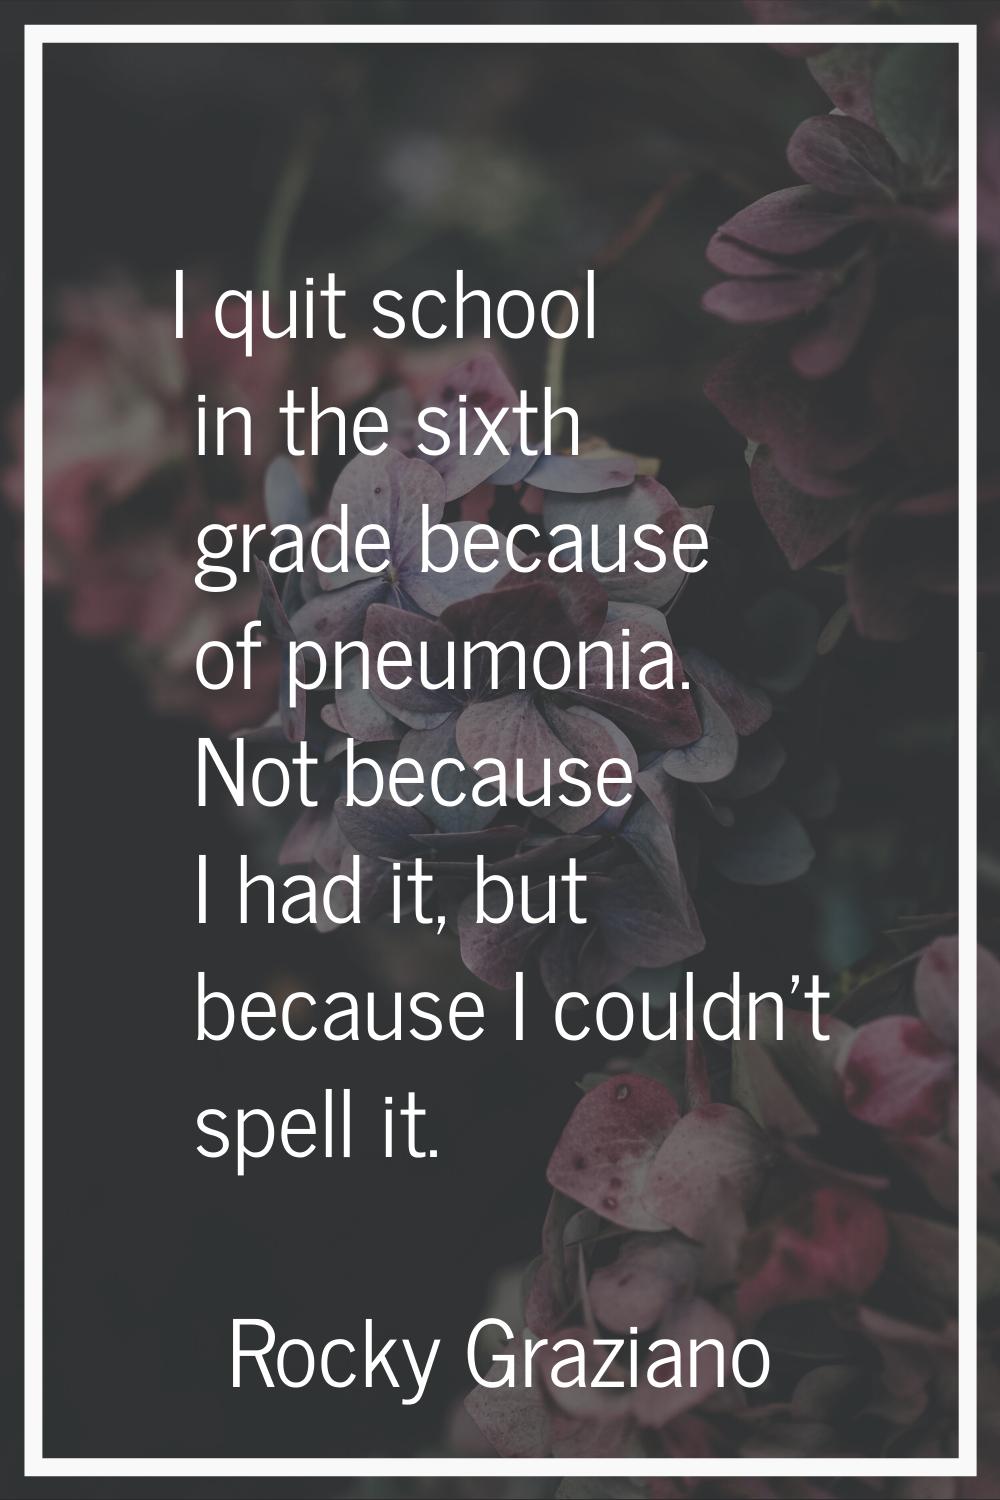 I quit school in the sixth grade because of pneumonia. Not because I had it, but because I couldn't